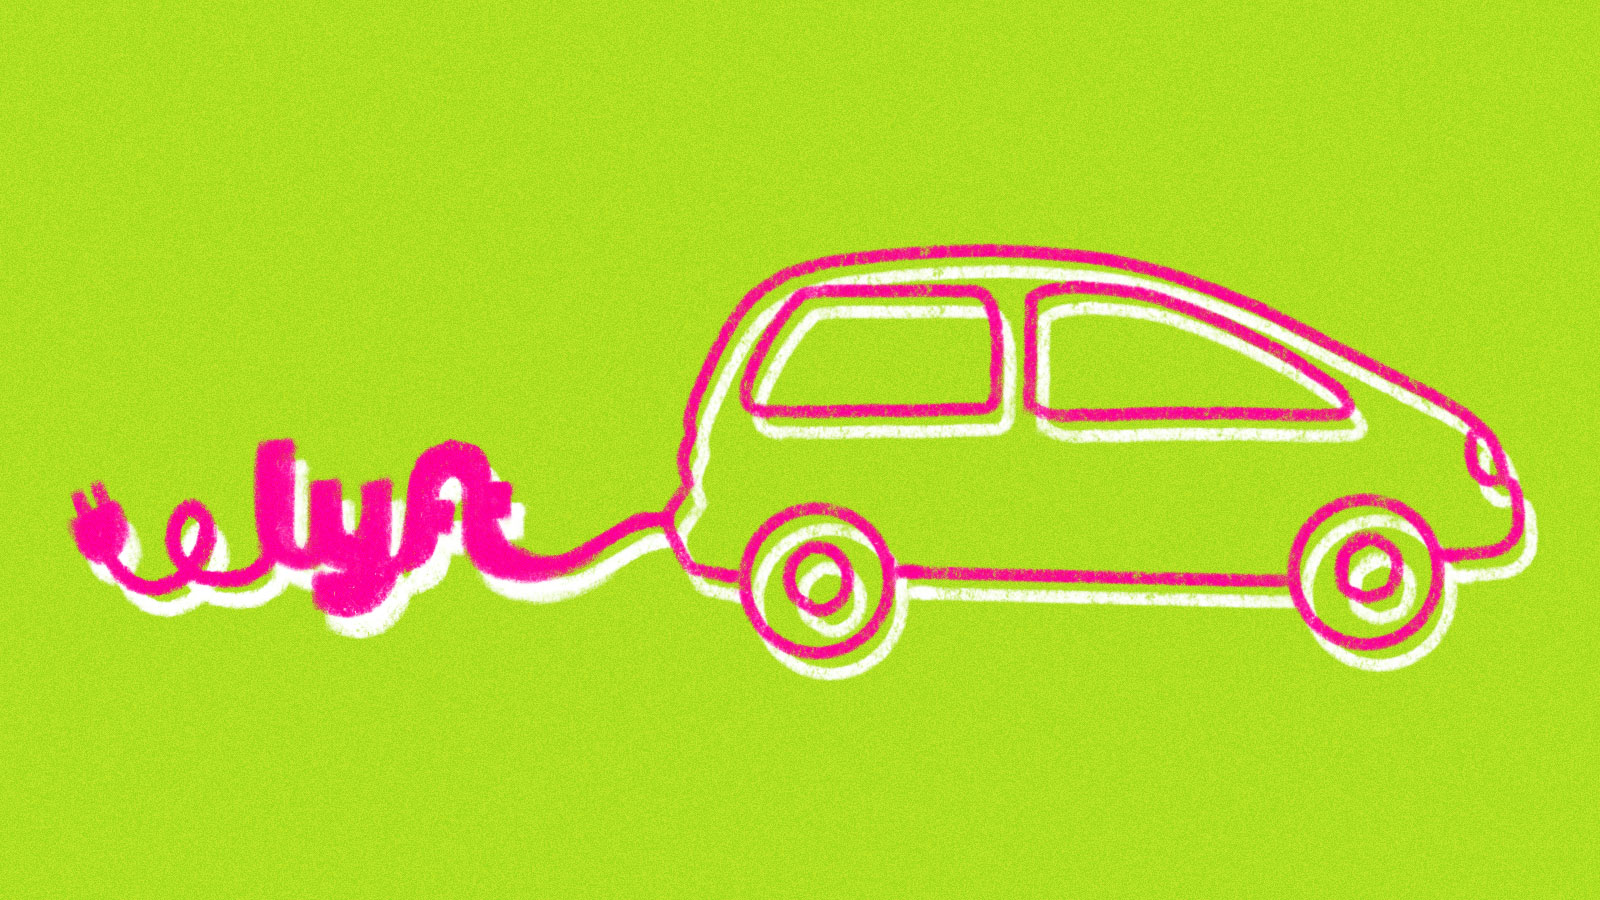 A drawing of an electric vehicle with a cord in the shape of the Lyft logo